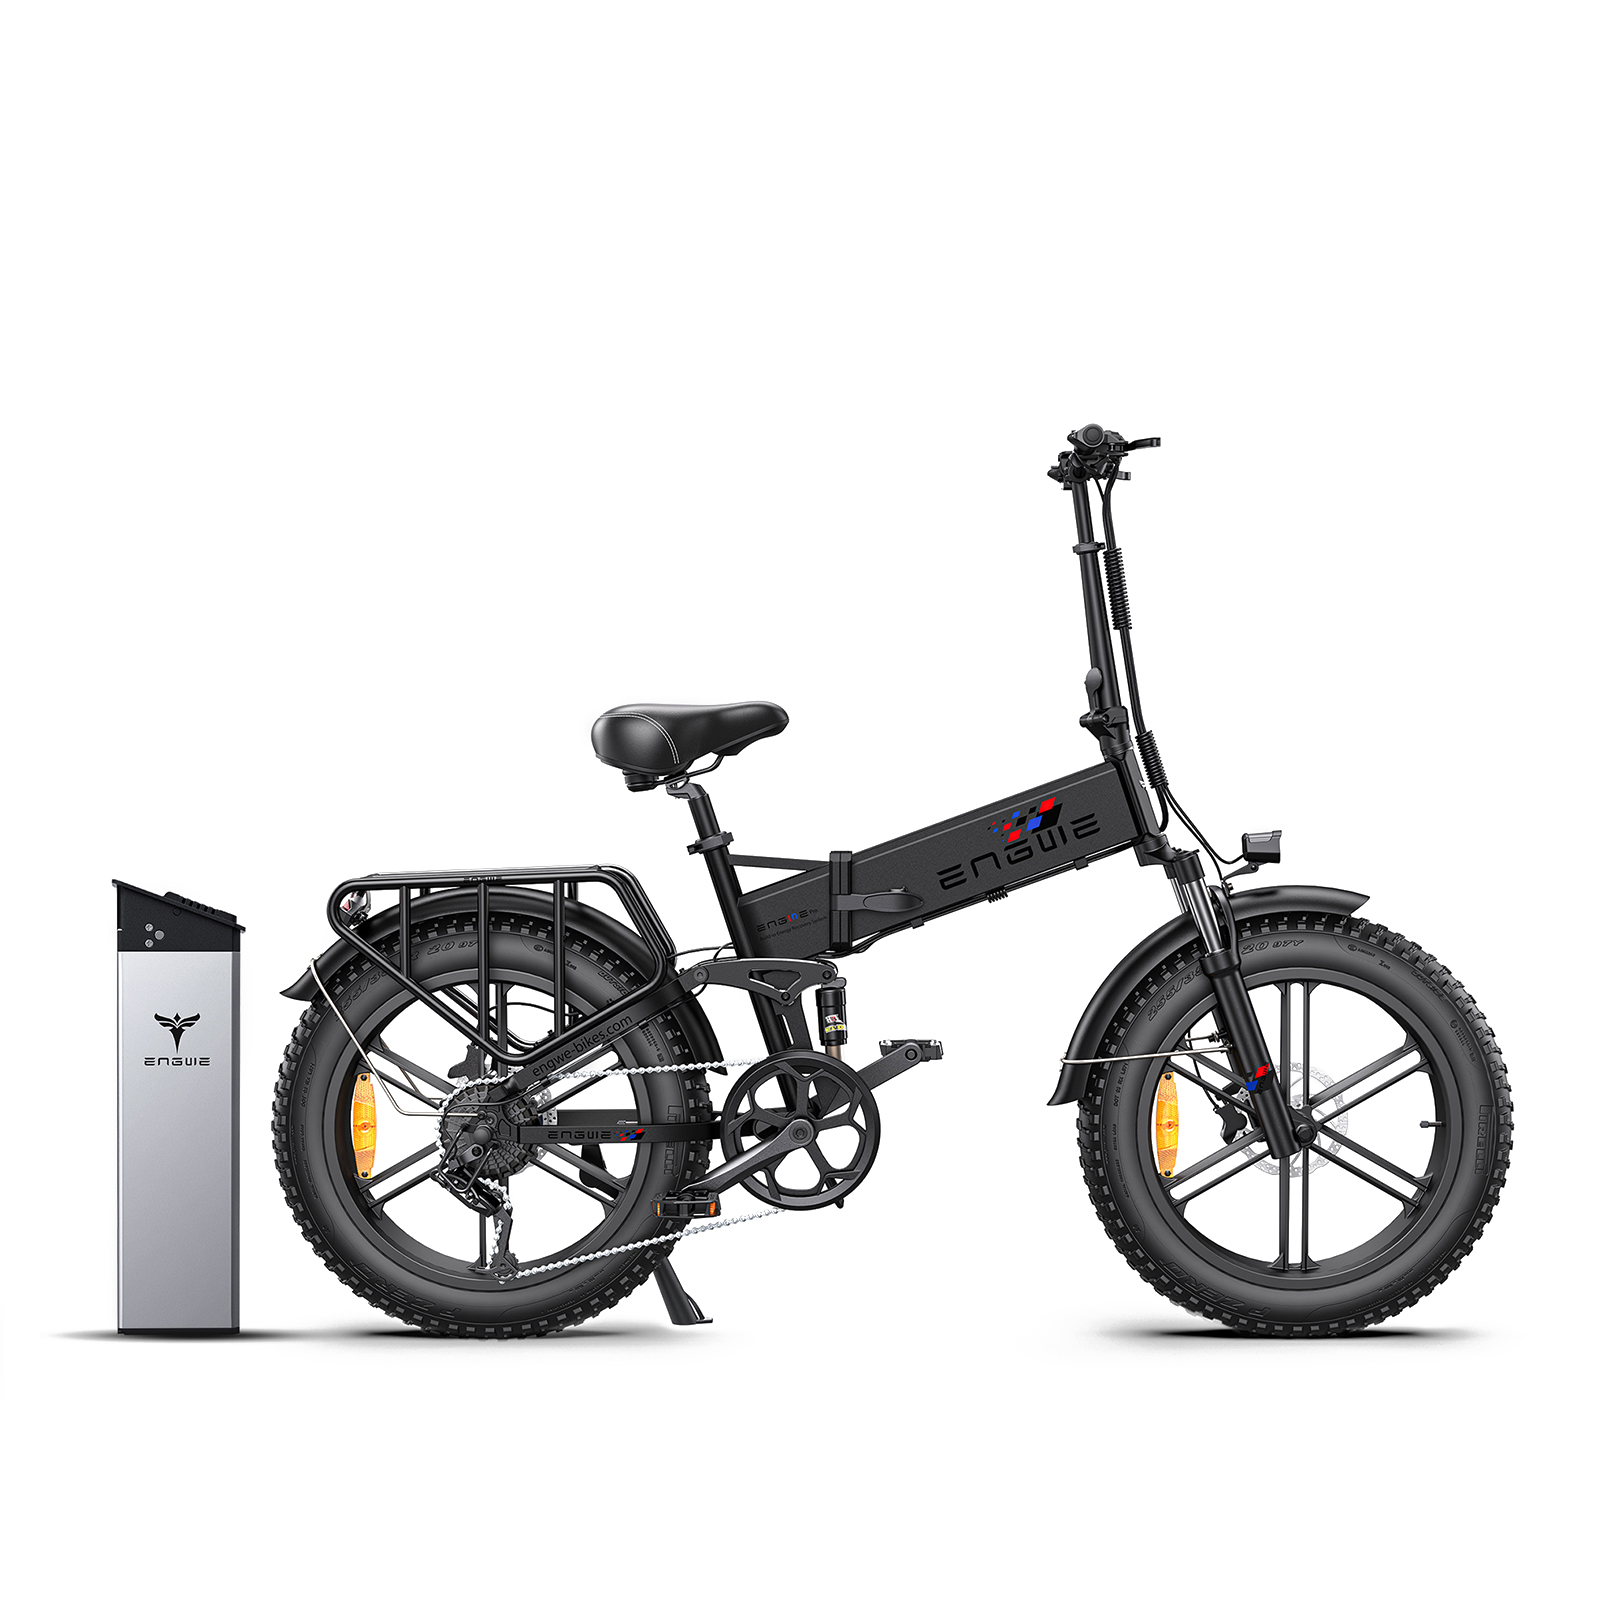 48V 750W 16AH Full Suspension Electric Bicycle Engwe ENGINE Pro Foldable E-bike 